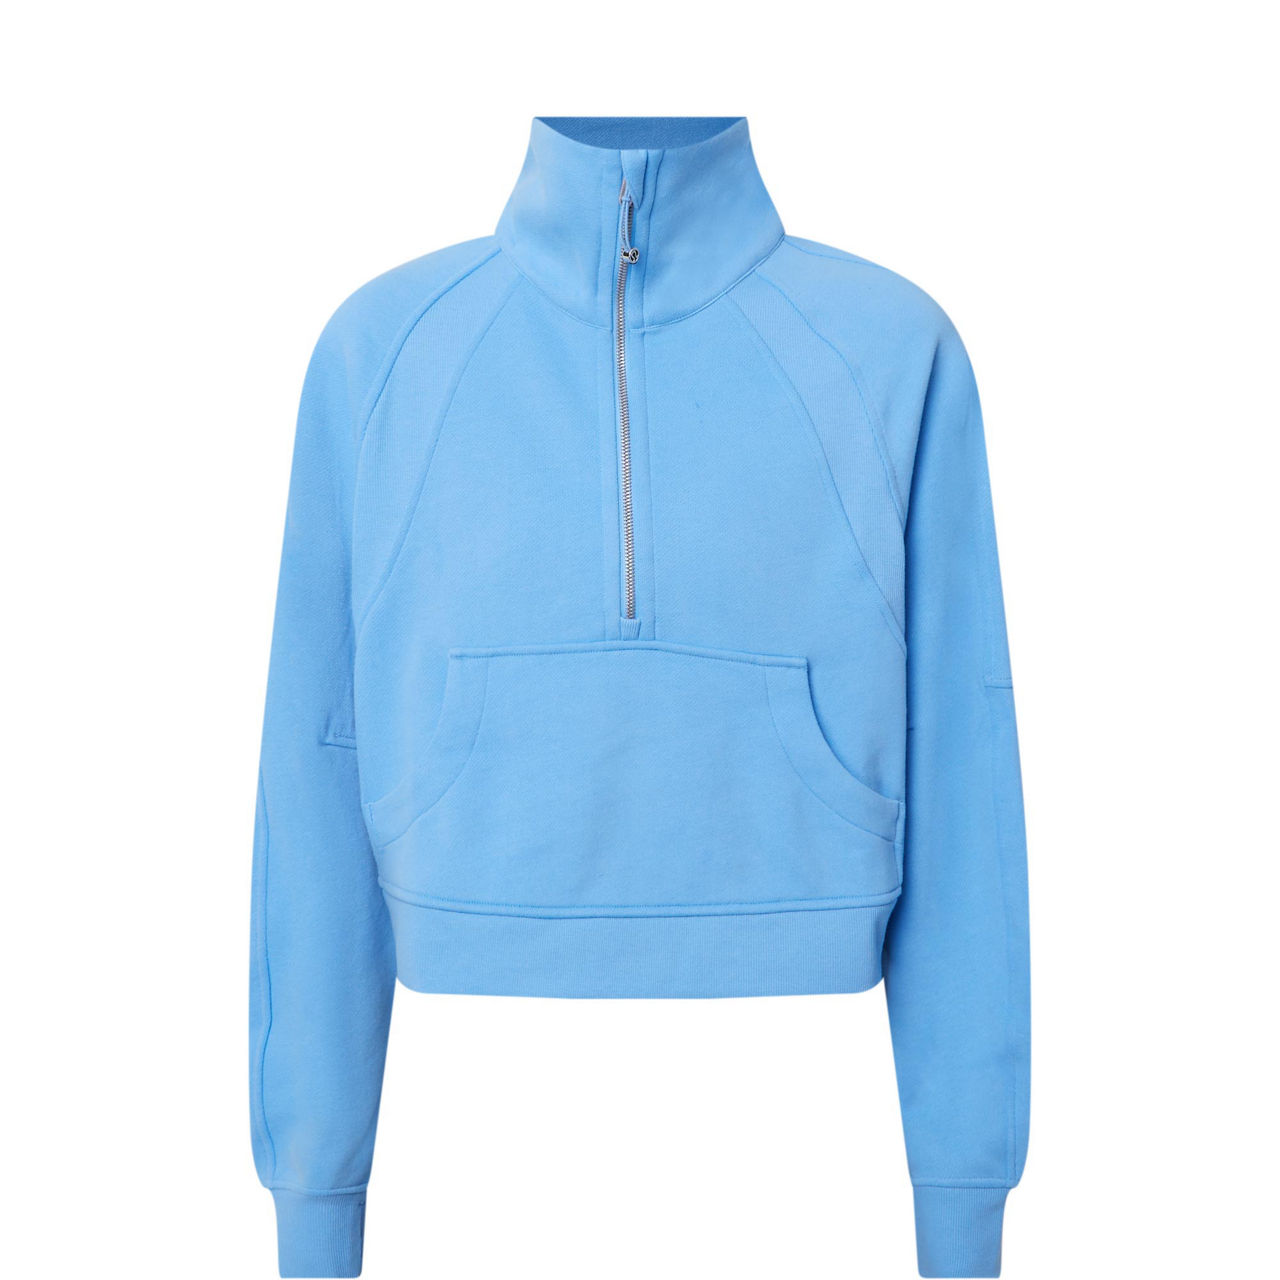 Some new colours of the scuba half zip (hooded and funnel neck